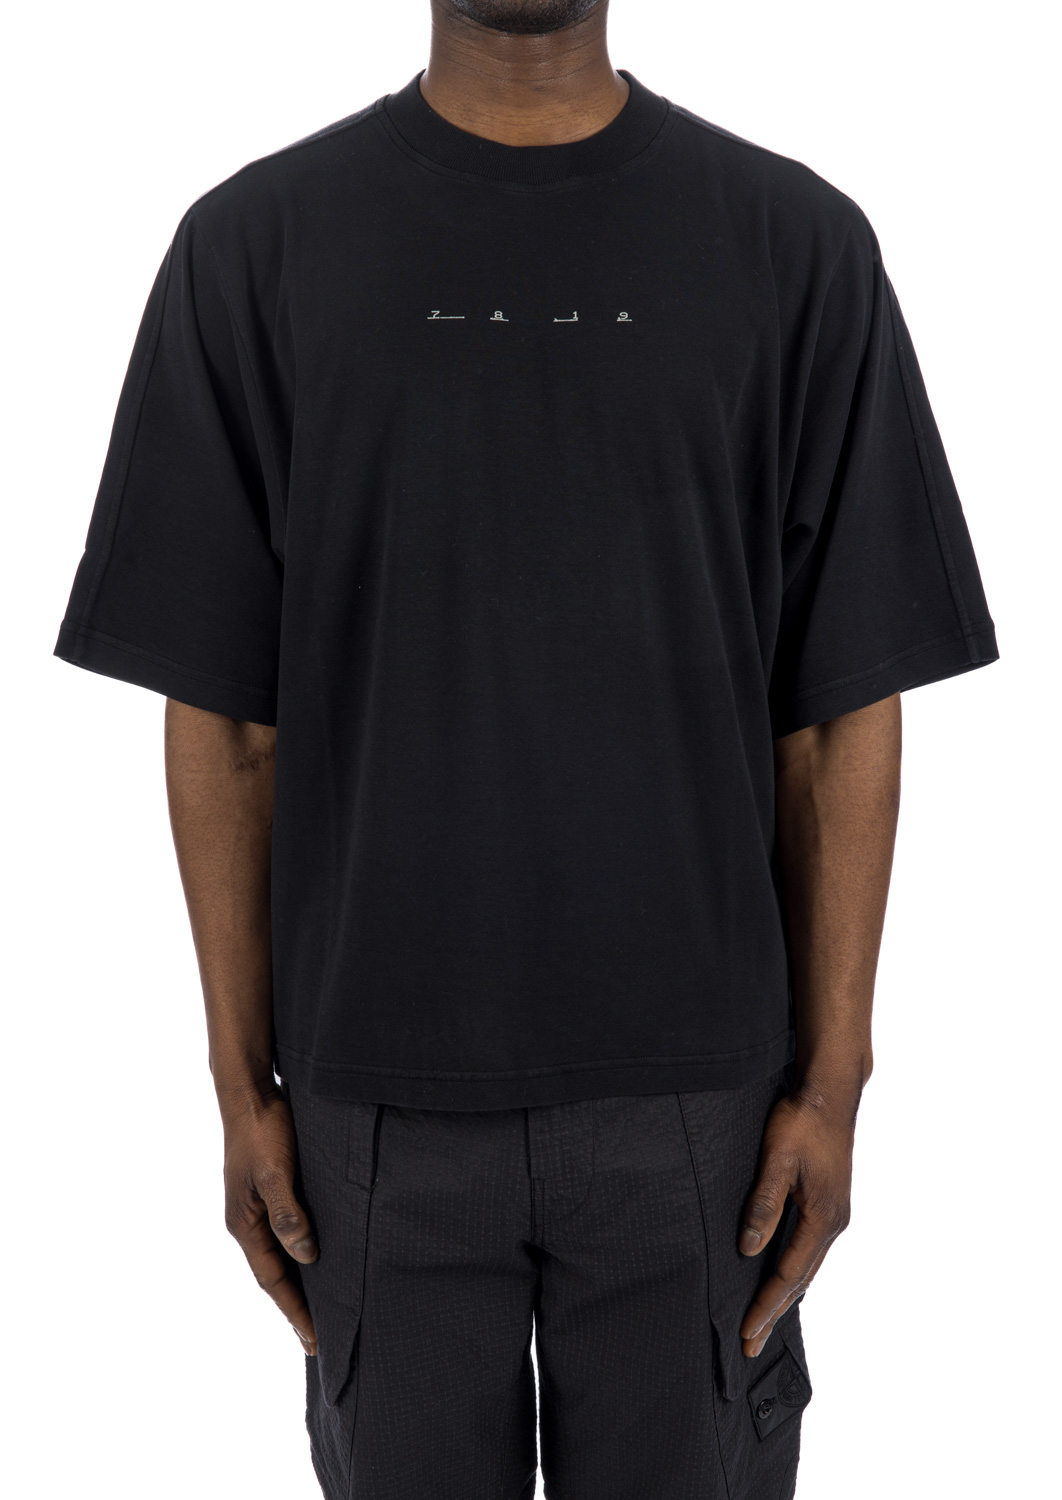 STONE ISLAND SHADOW PROJECT 19AW S/S Teeトップス